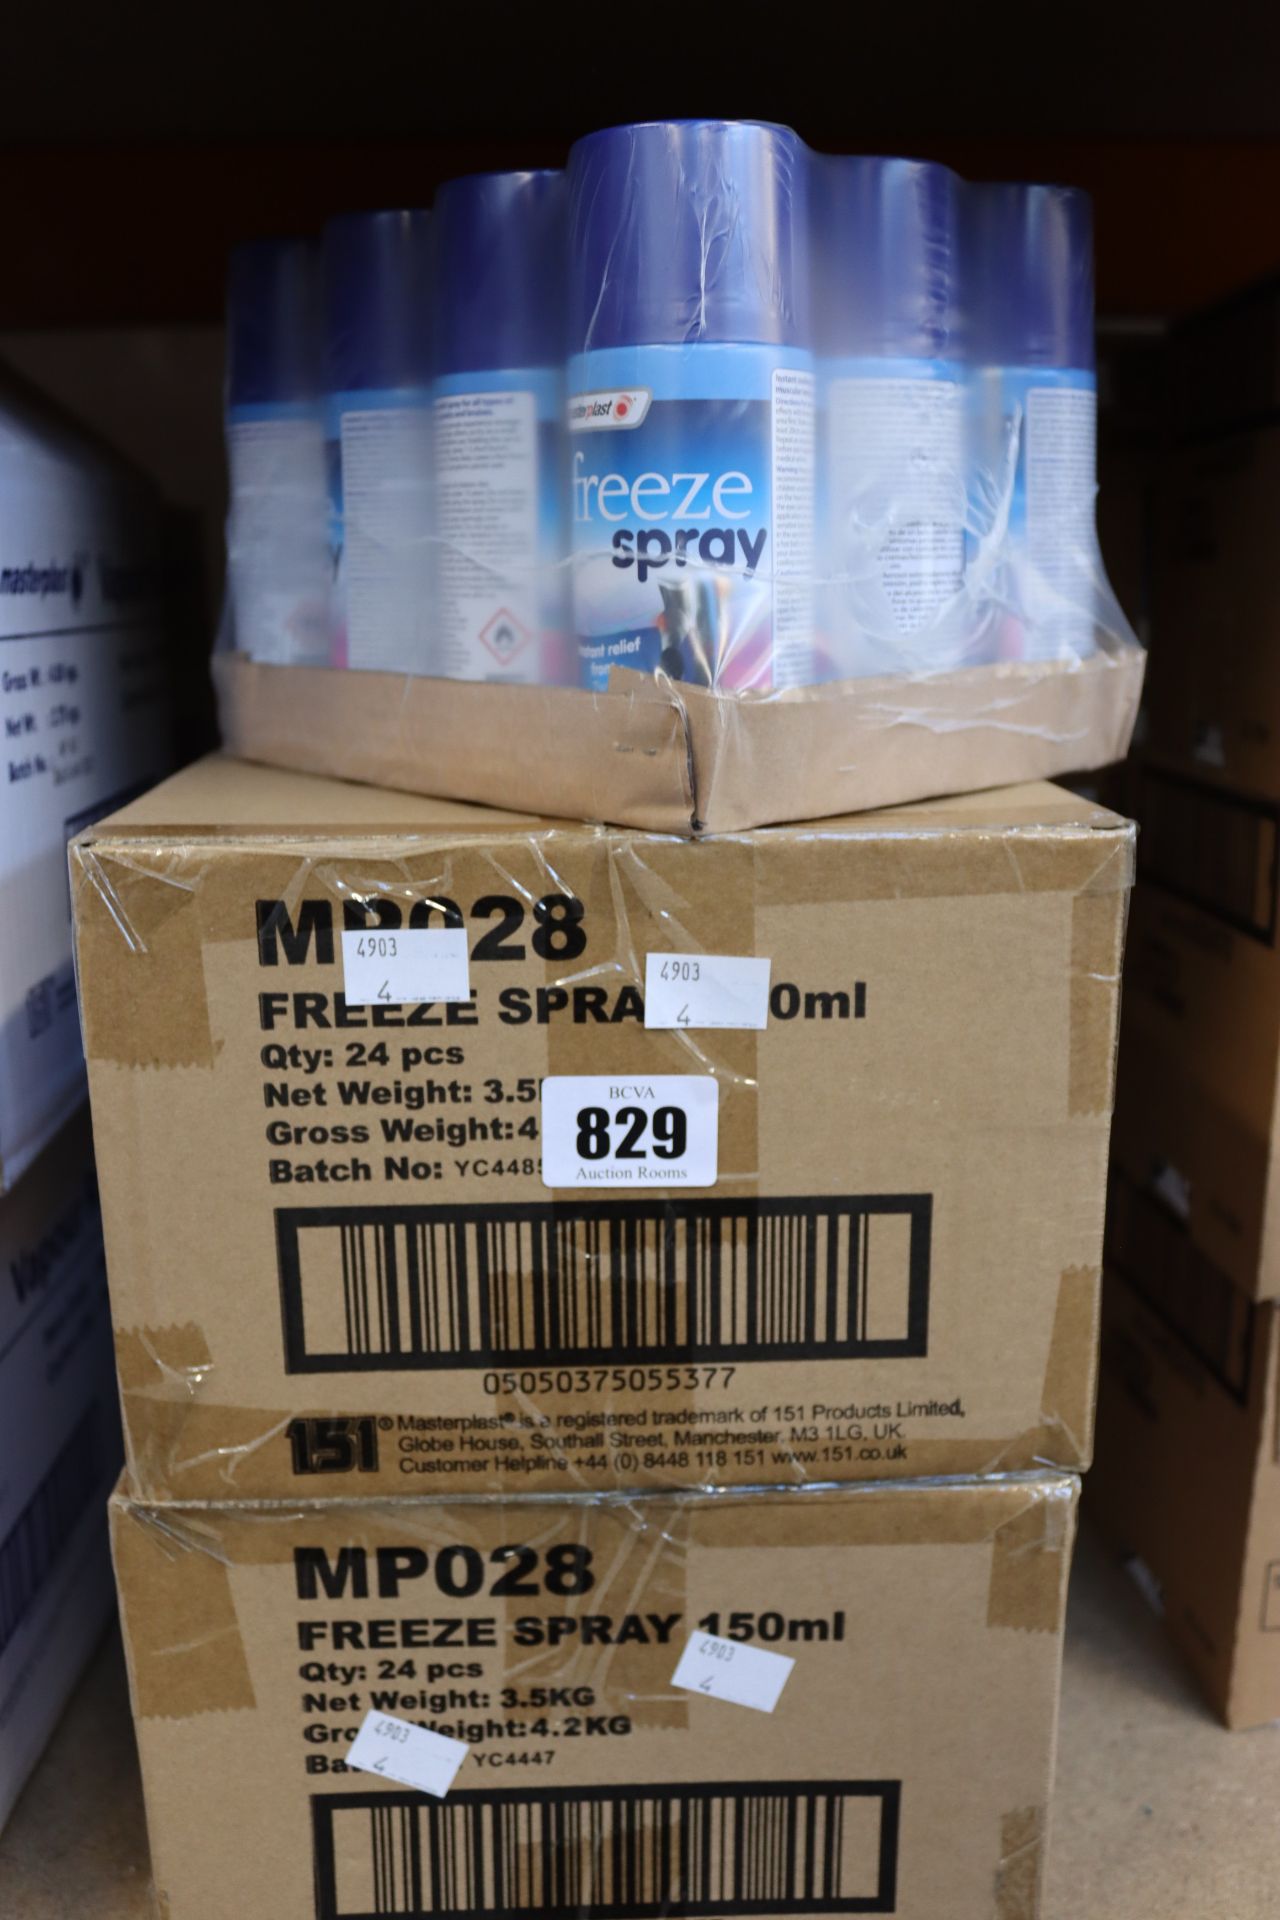 Five boxes of Masterplast freeze spray (24 cans per box).